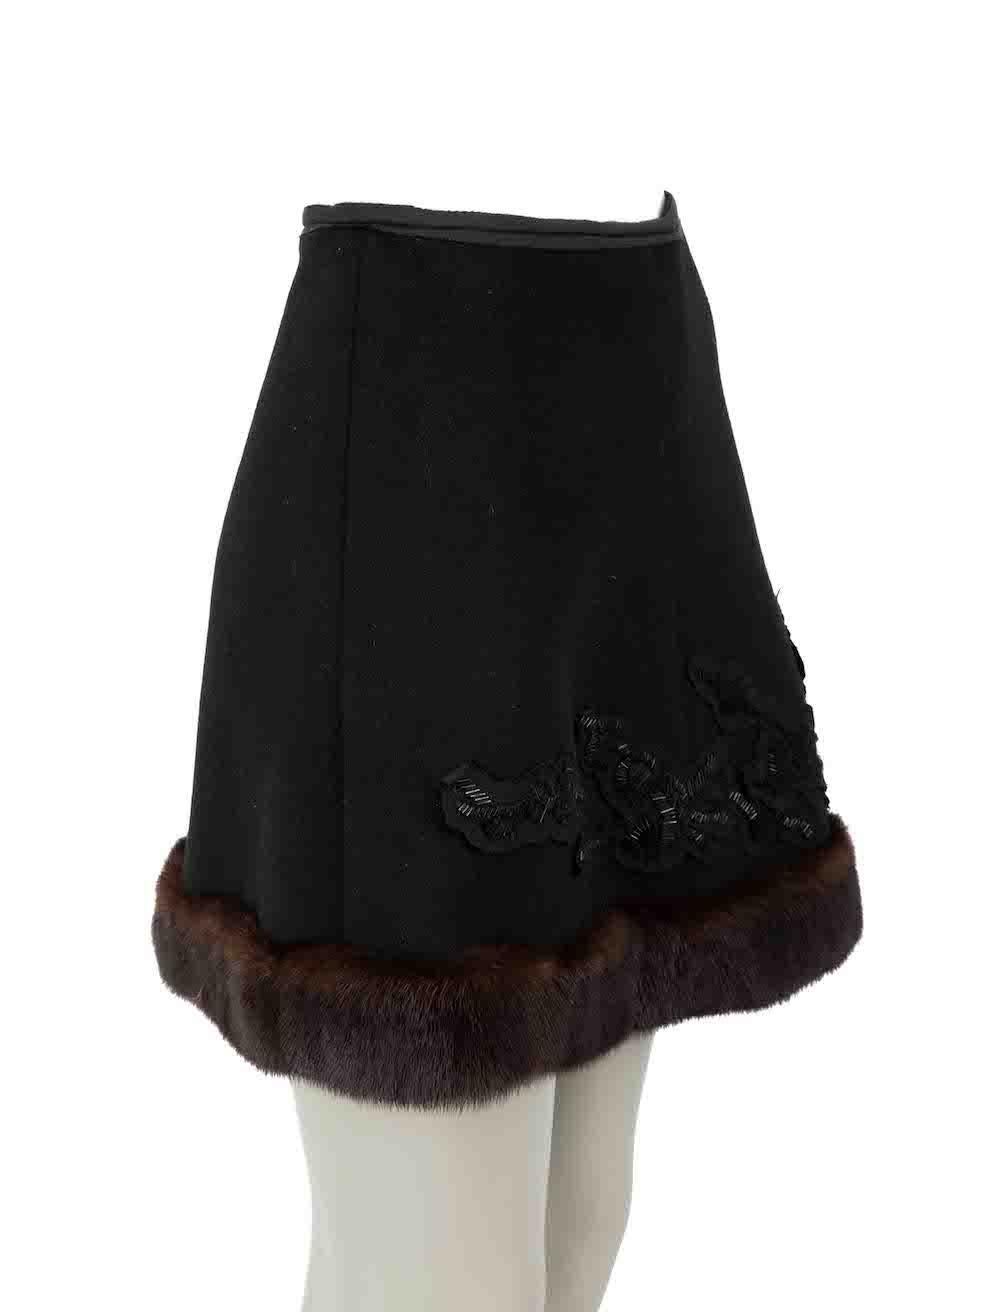 CONDITION is Very good. Minimal wear to skirt is evident. Minimal wear to the embellishment with missing beads on this used Prada designer resale item.
 
Details
Vintage 
Black
Wool
A-line skirt
Mini
Mink fur trim
Bead embellished detail
Back zip